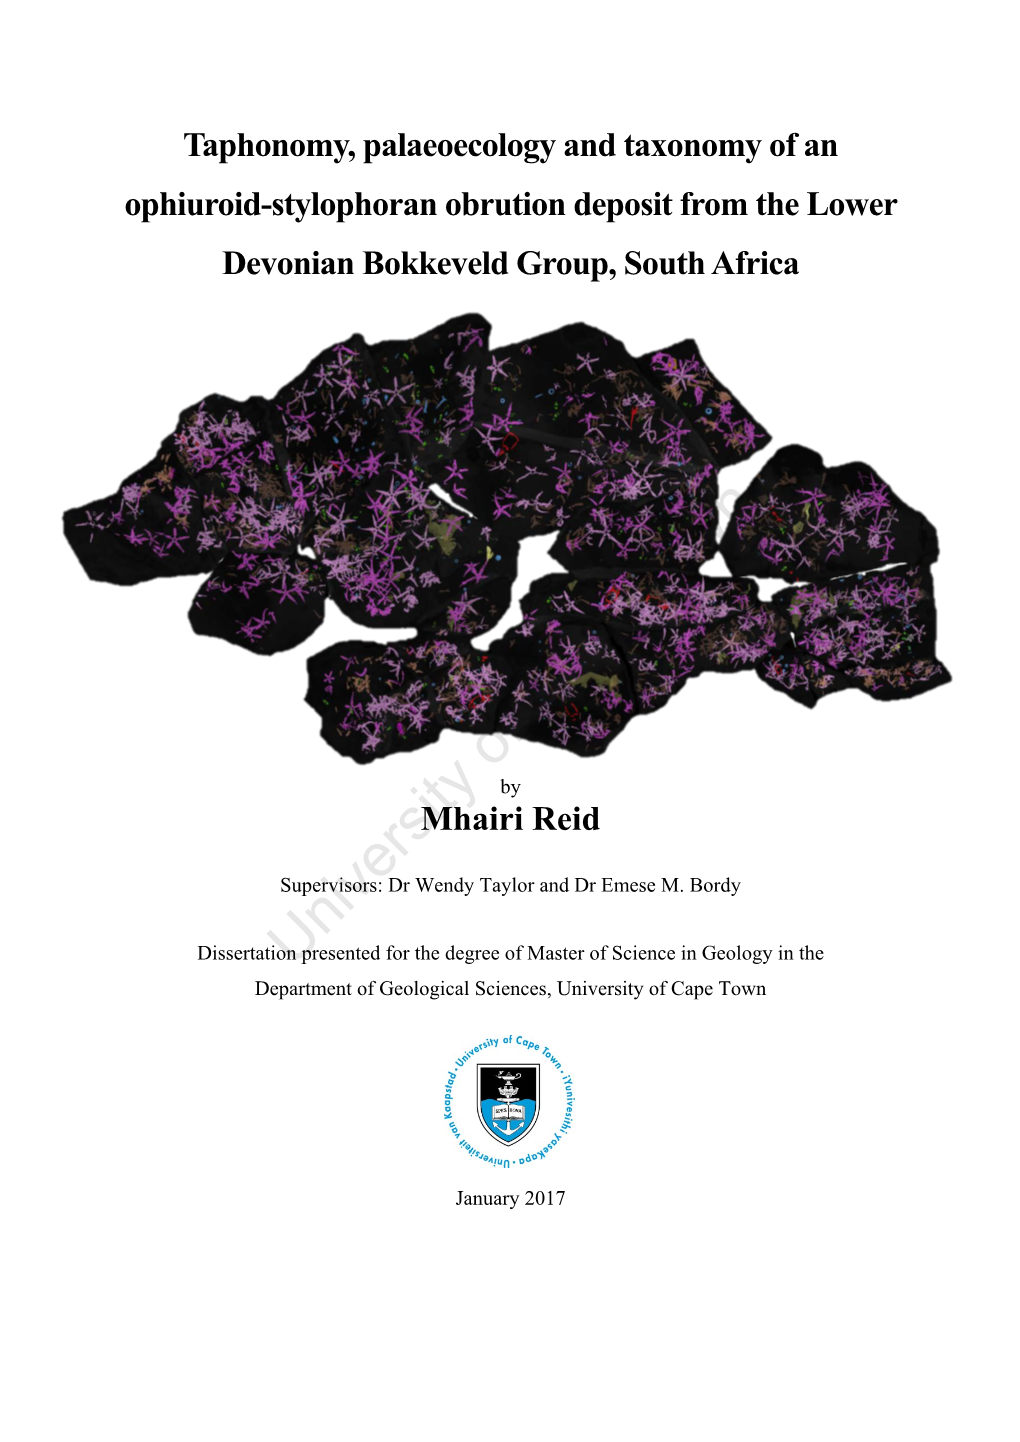 Taphonomy, Palaeoecology and Taxonomy of an Ophiuroid-Stylophoran Deposit from the Lower Devonian Bokkeveld Group, South Africa